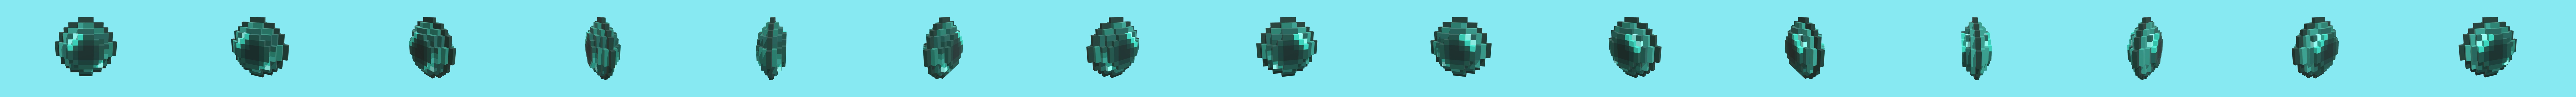 Minecraft Ender Pearl - Download Free 3D model by MythicaI (@MythicaI)  [33365dc]